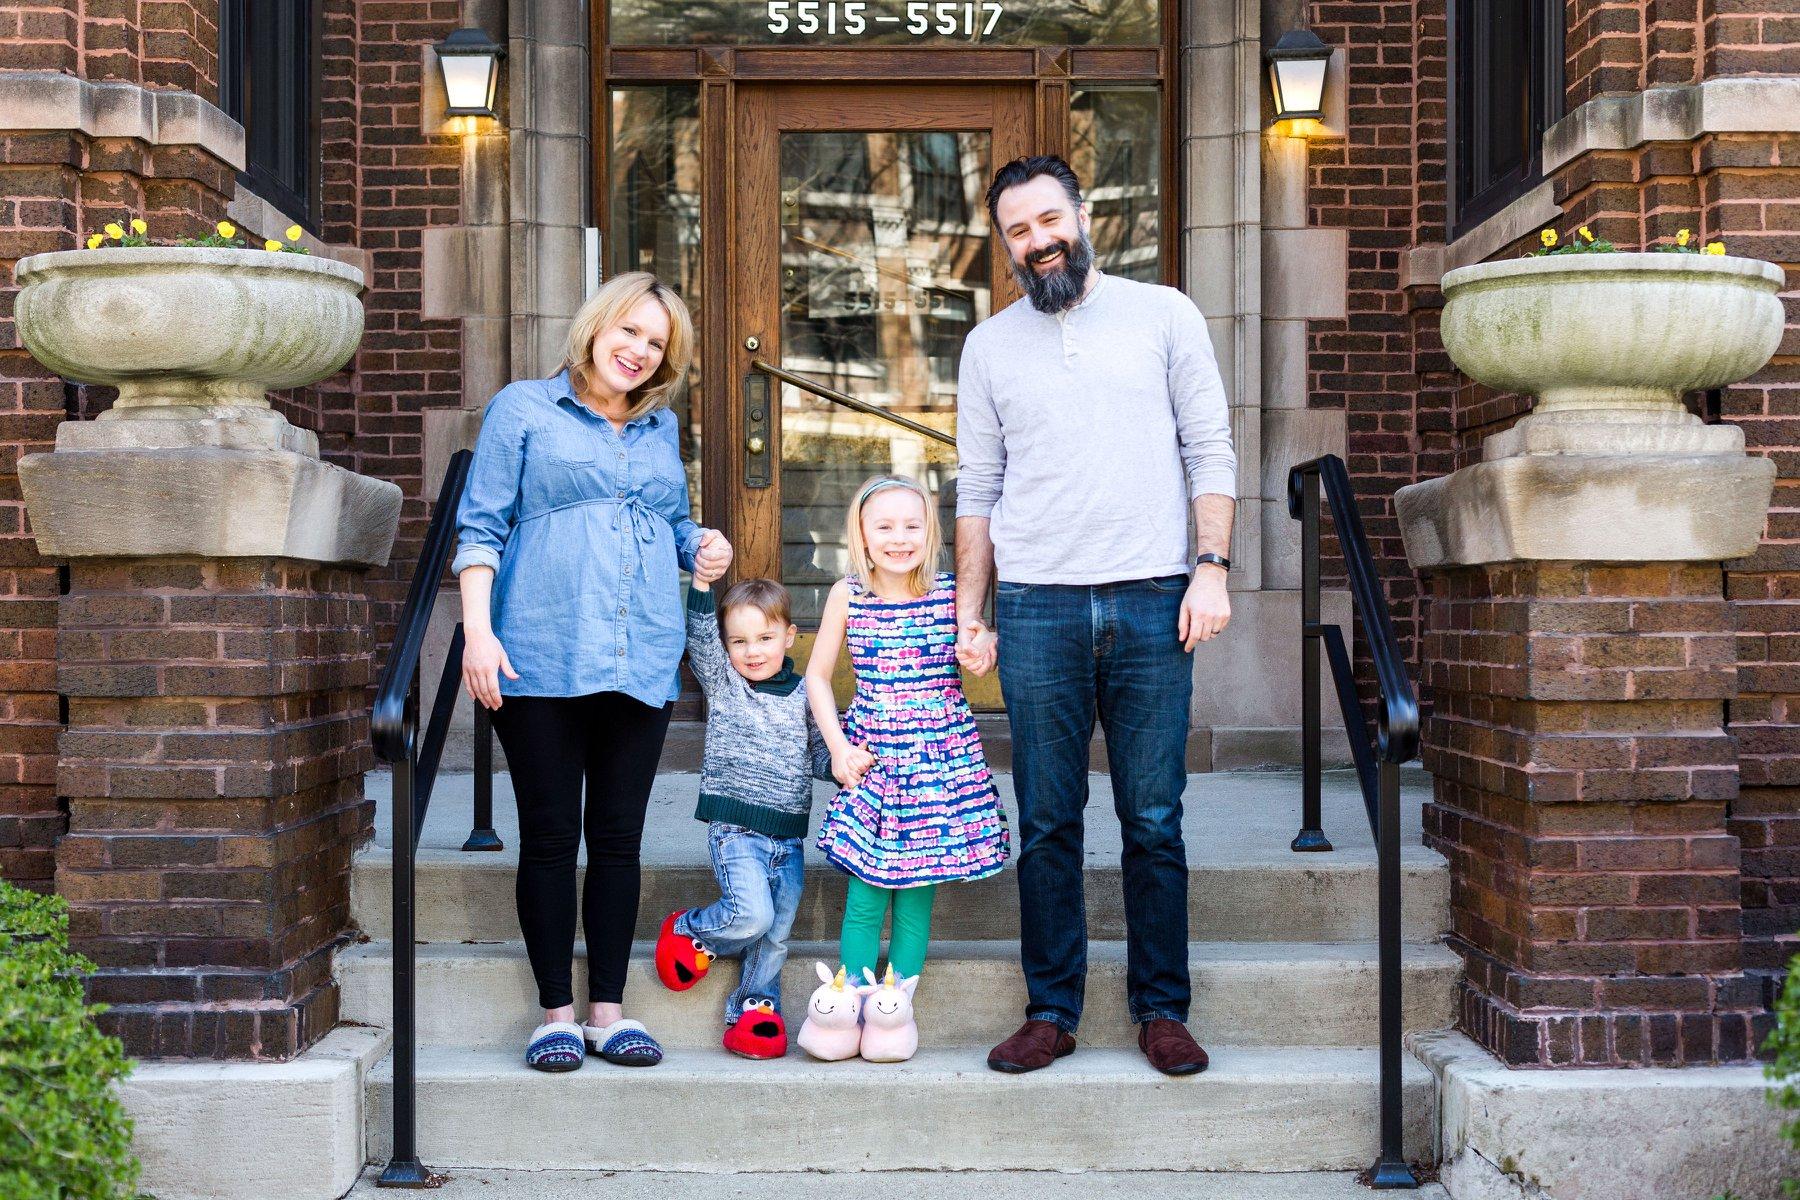 The Salesberry family, from left, Christina, Finn, Rosie and Brandon pose for a picture in April. (Courtesy Christina Salesberry)